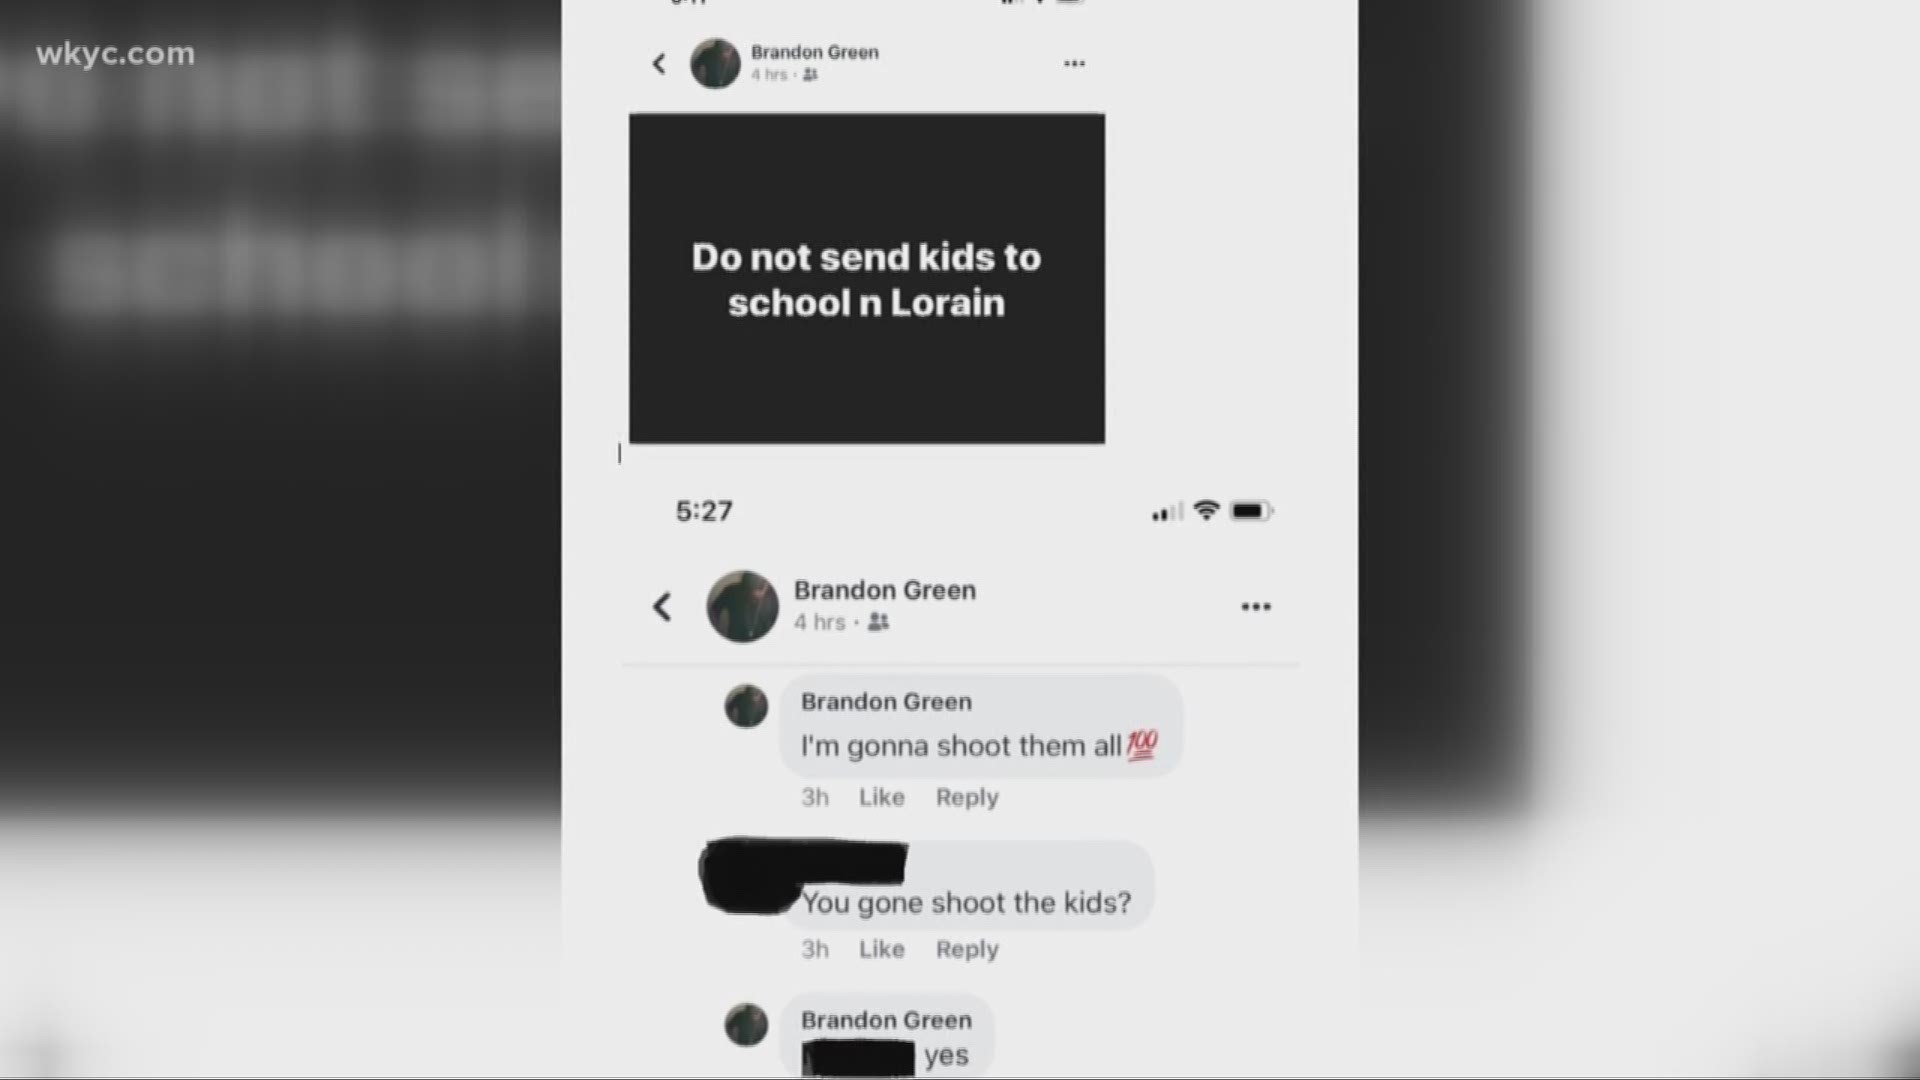 Feb. 20, 2019: Police arrested an Elyria man after he posted Facebook threats to shoot Lorain students. Police were alerted to the posts after Brandon Green's account posted, 'Do not send kinds to school n Lorain' and 'I'm gonna shoot them all.'